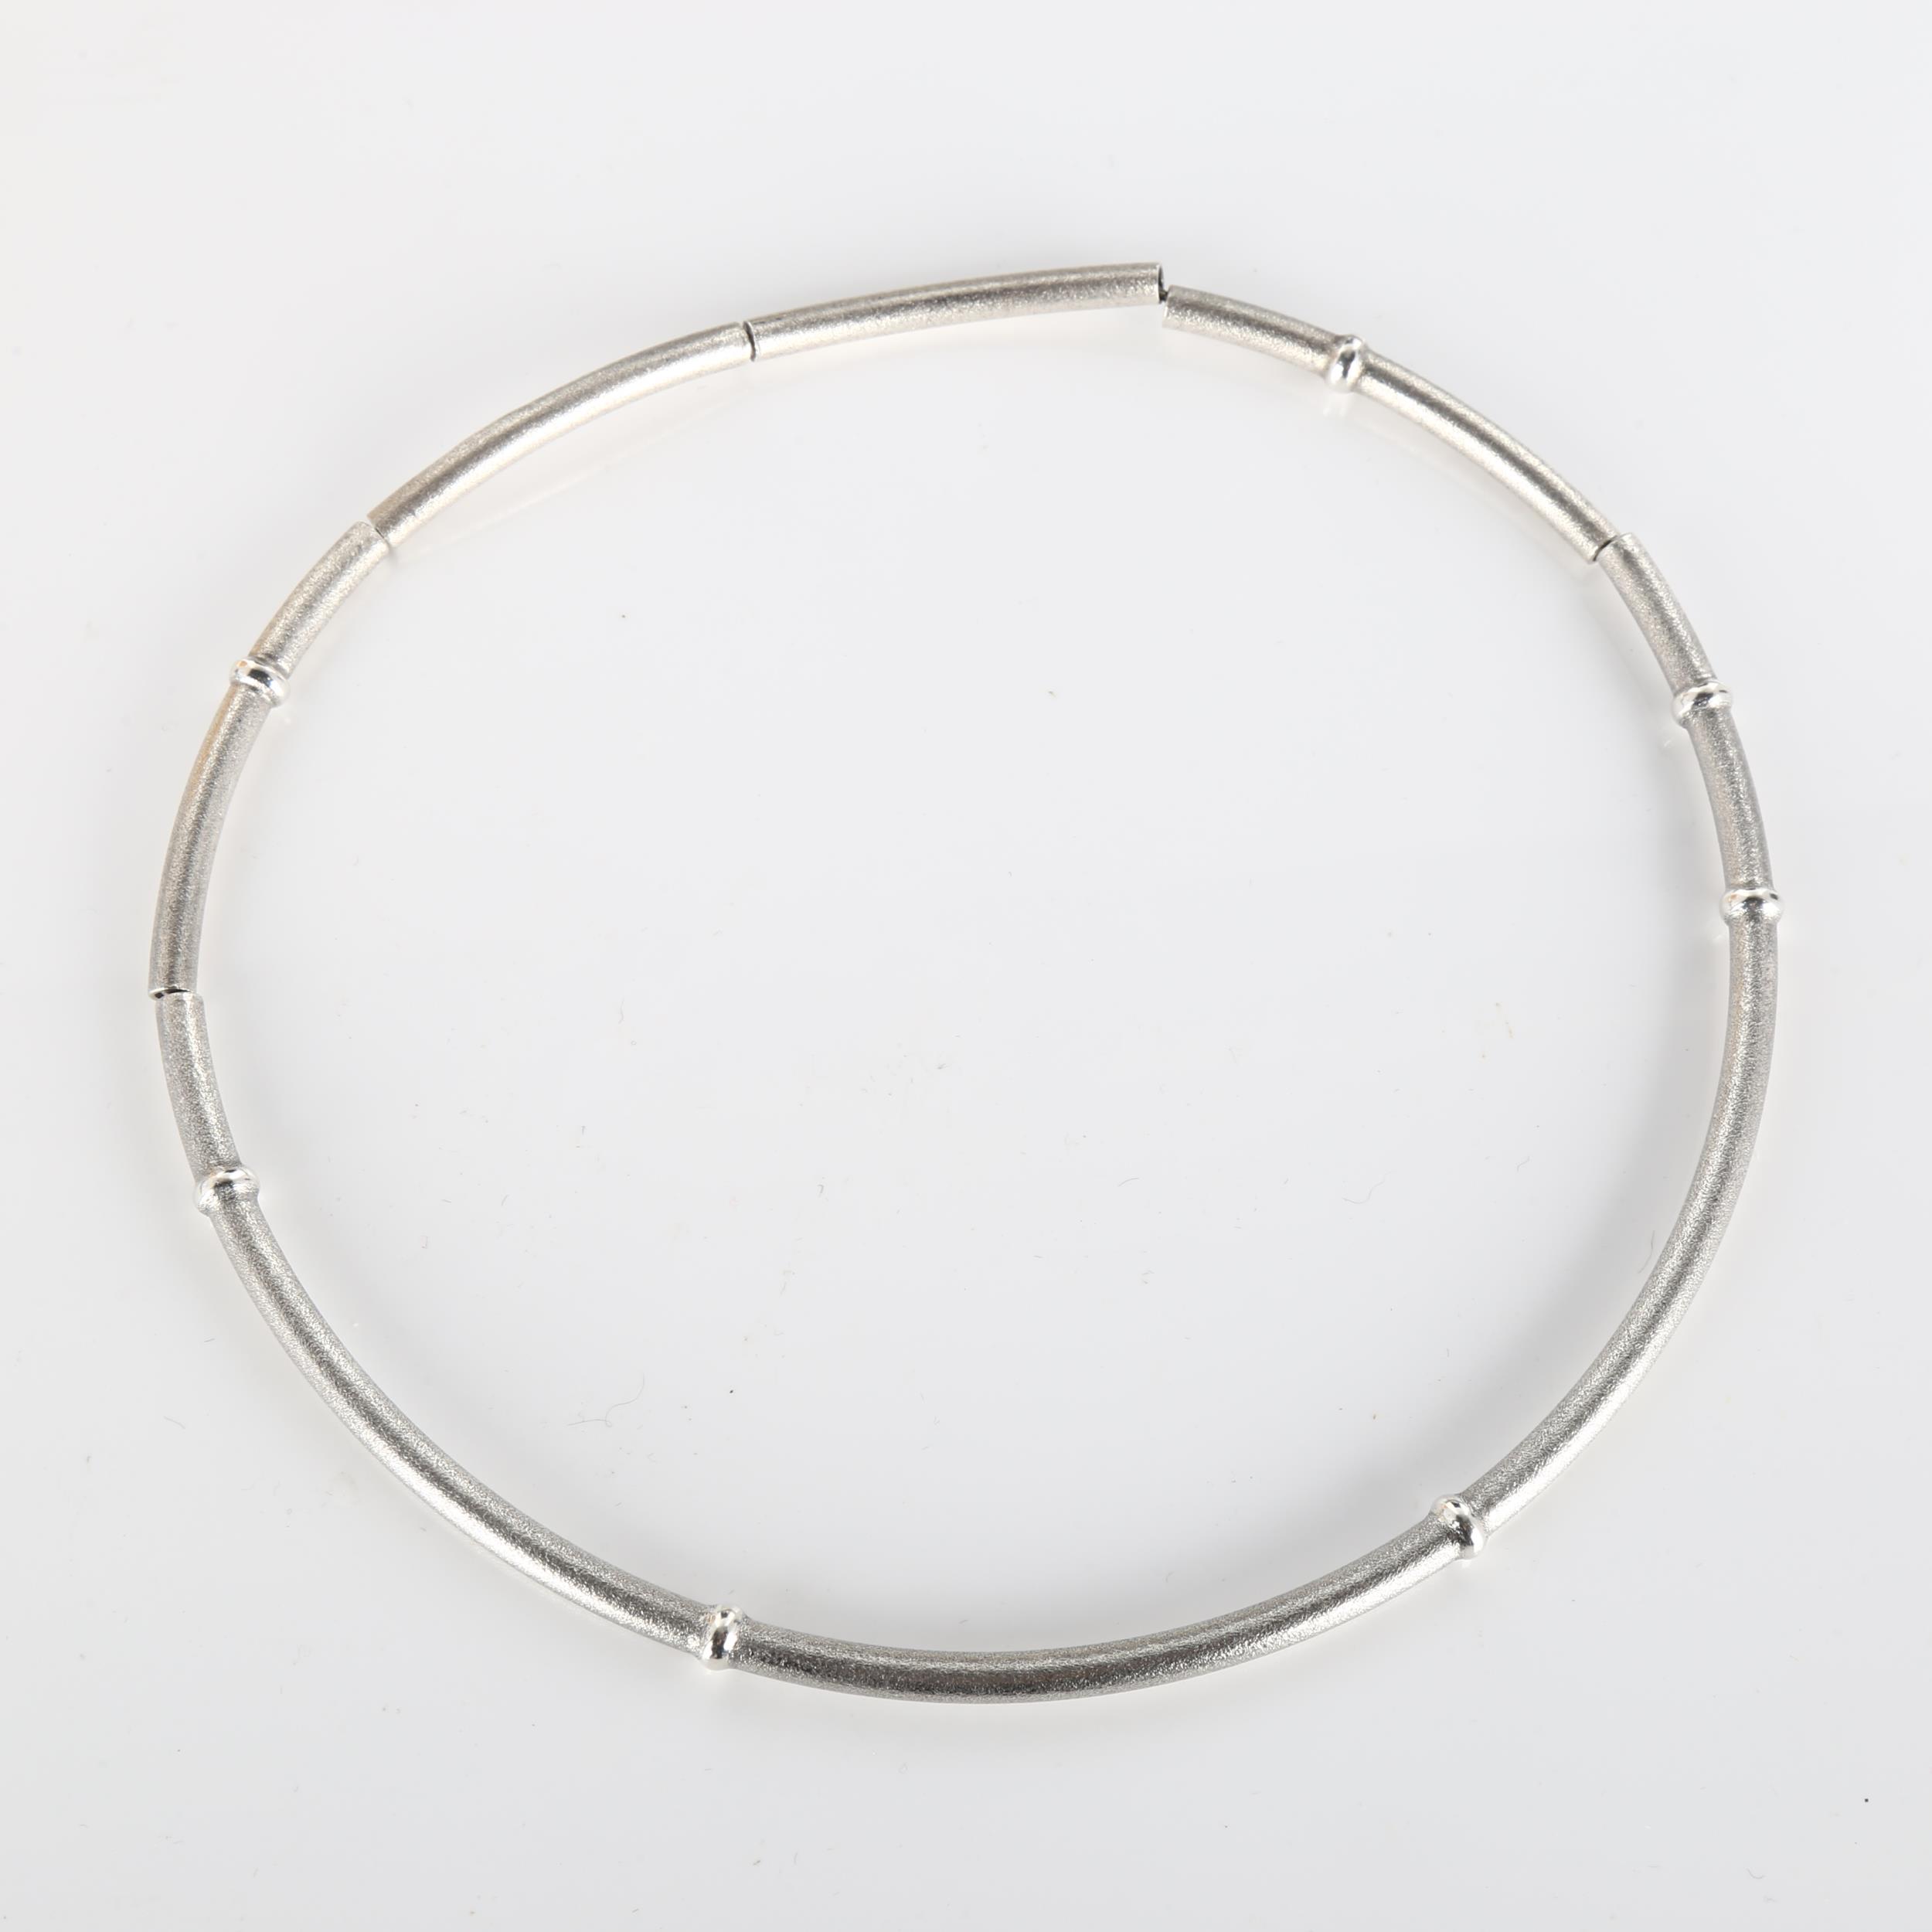 LAPPONIA - a Finnish sterling silver necklace, segmented form with textured ground and raised bands,